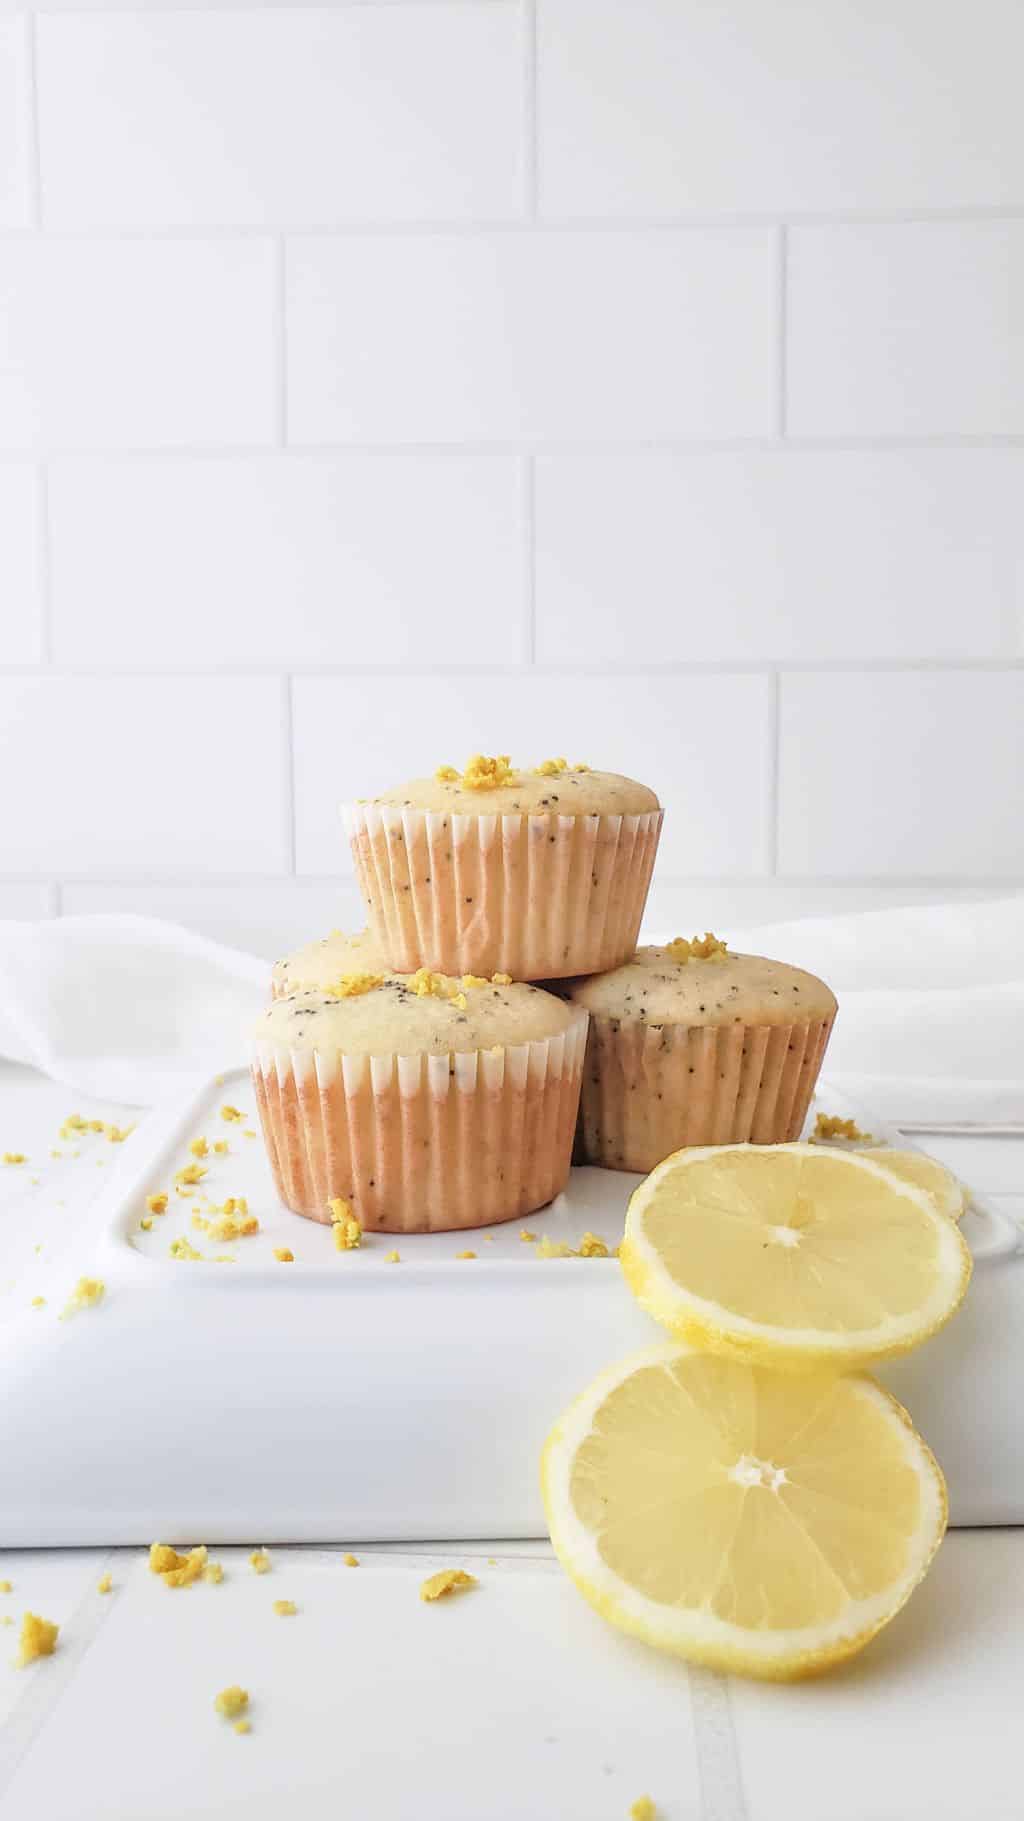 A stack of three lemon and poppy seed muffins on a white plate with slices of lemon